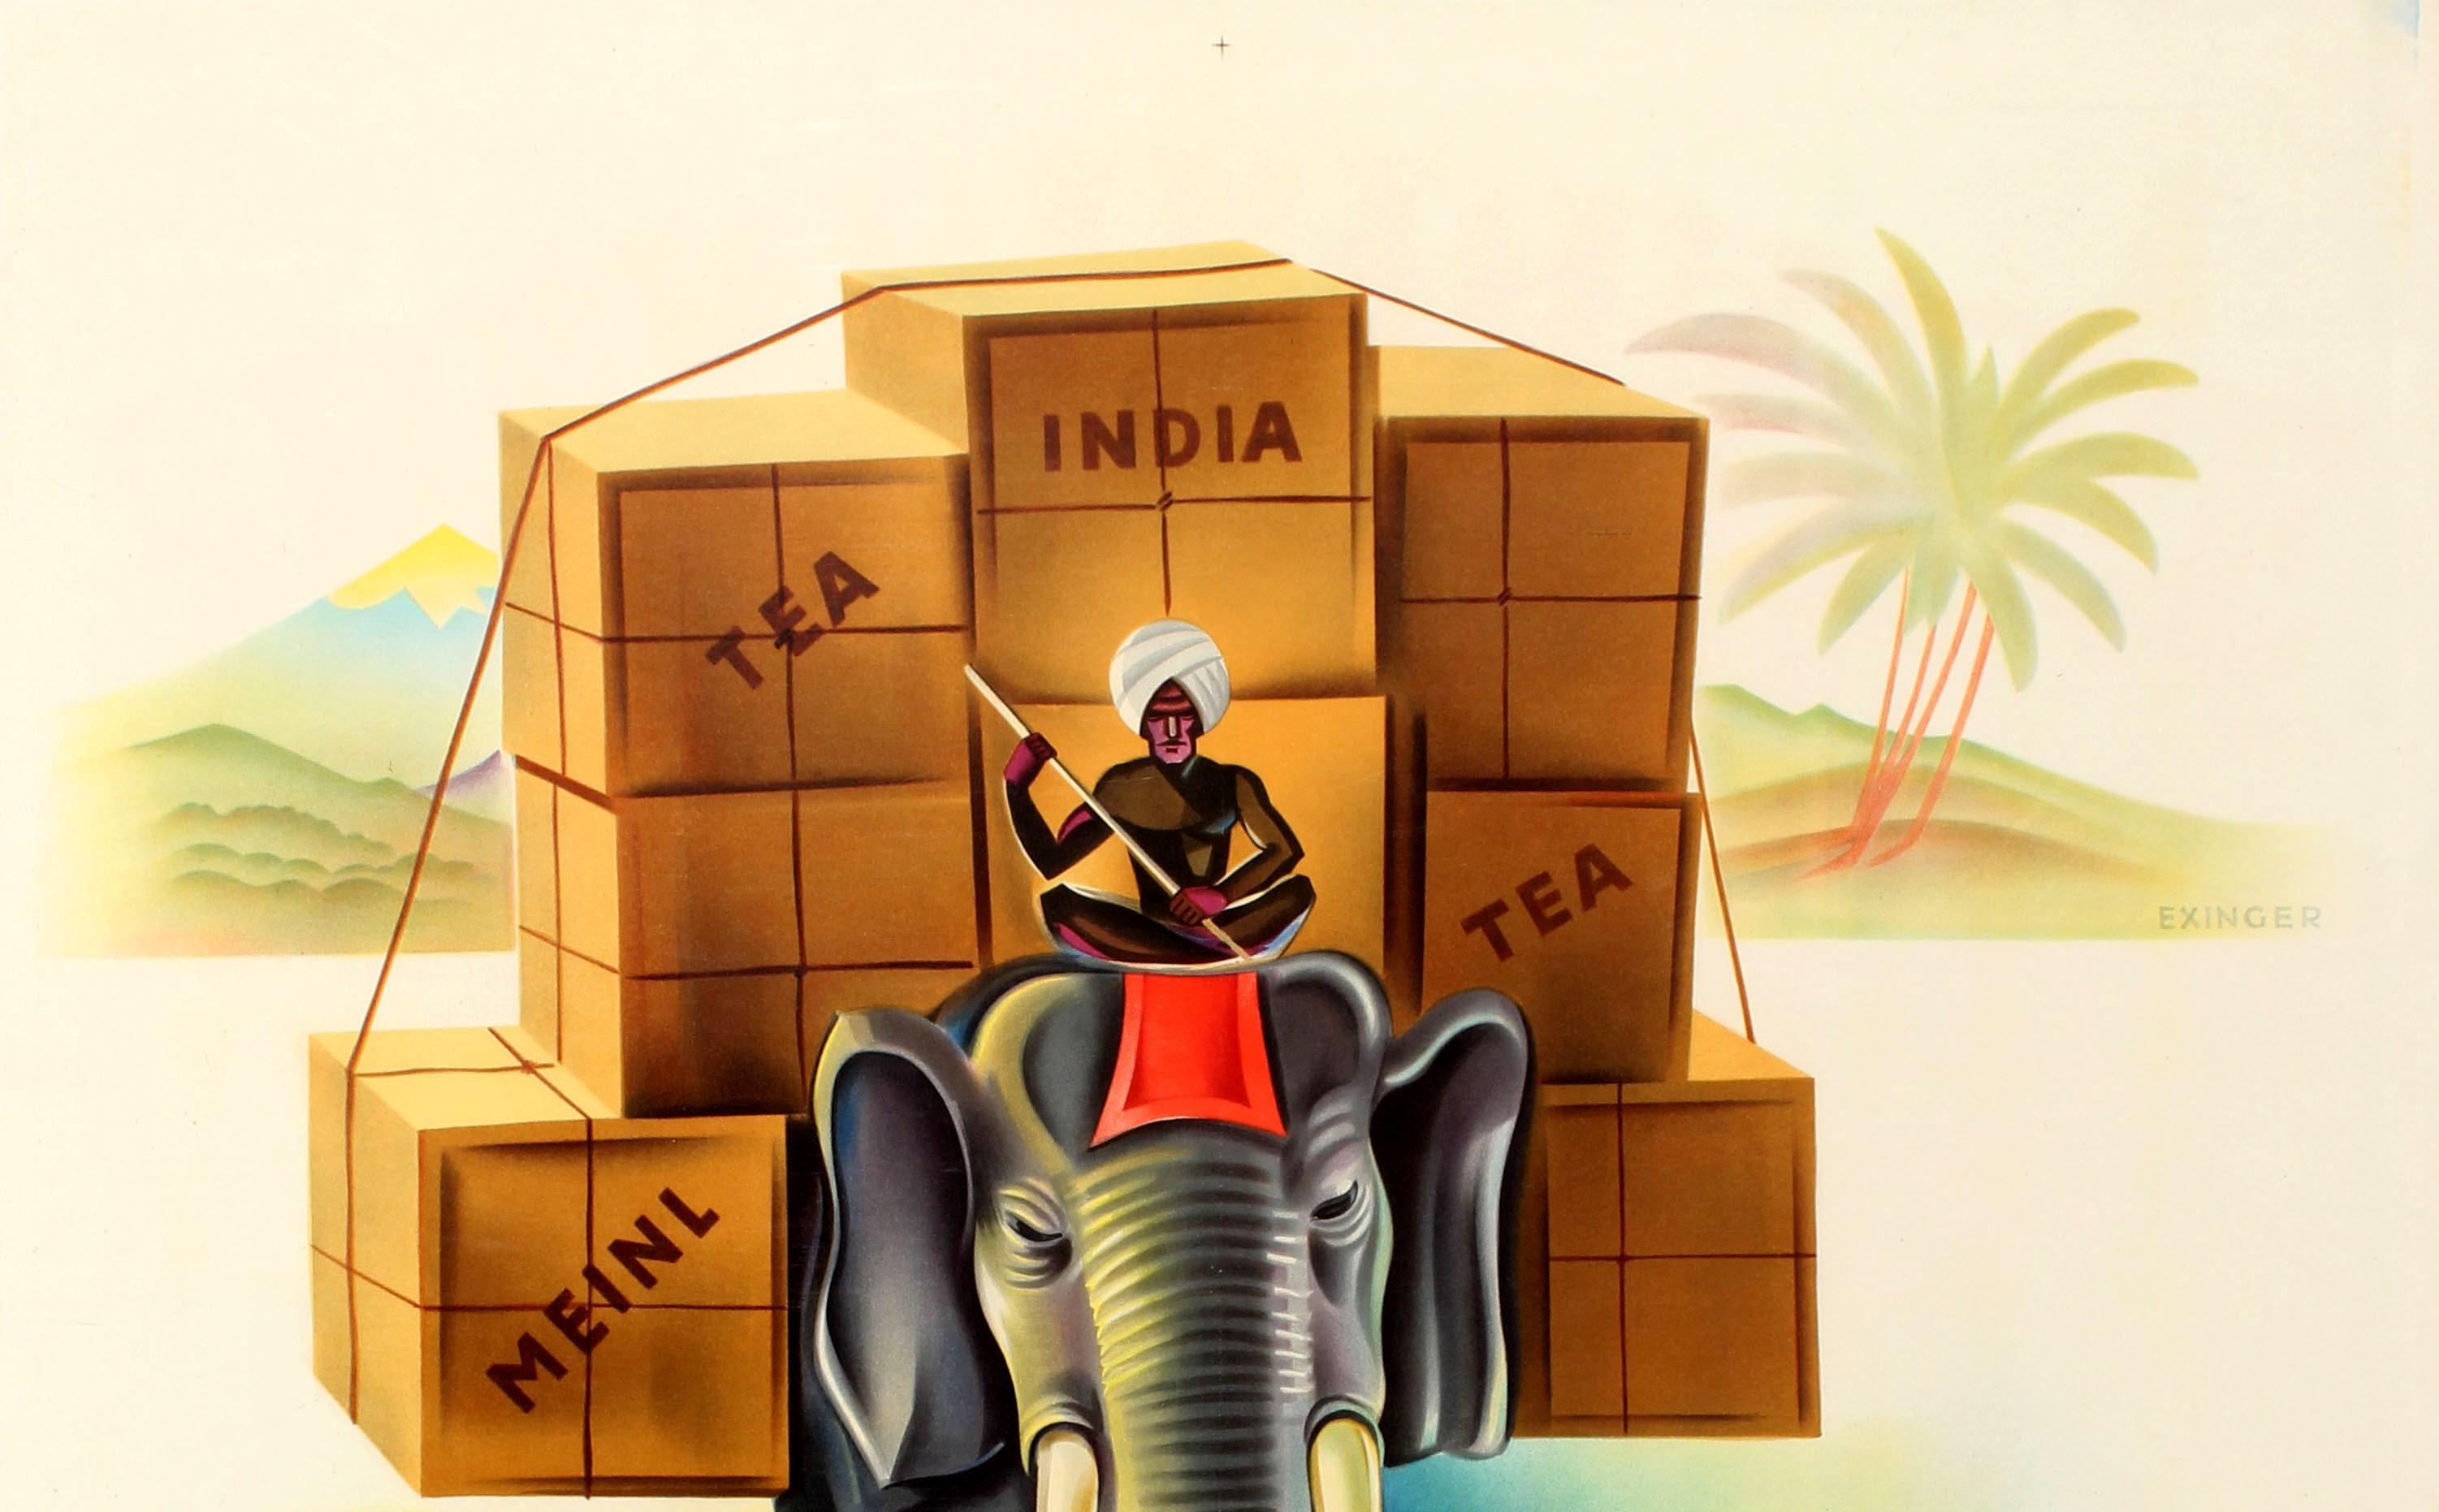 Original vintage advertising poster for Meinl India Tee featuring a great illustration by Otto Exinger (1897-1957) of an elephant walking towards the viewer though water with a turbaned man and crates of tea on its back in front of palm trees and